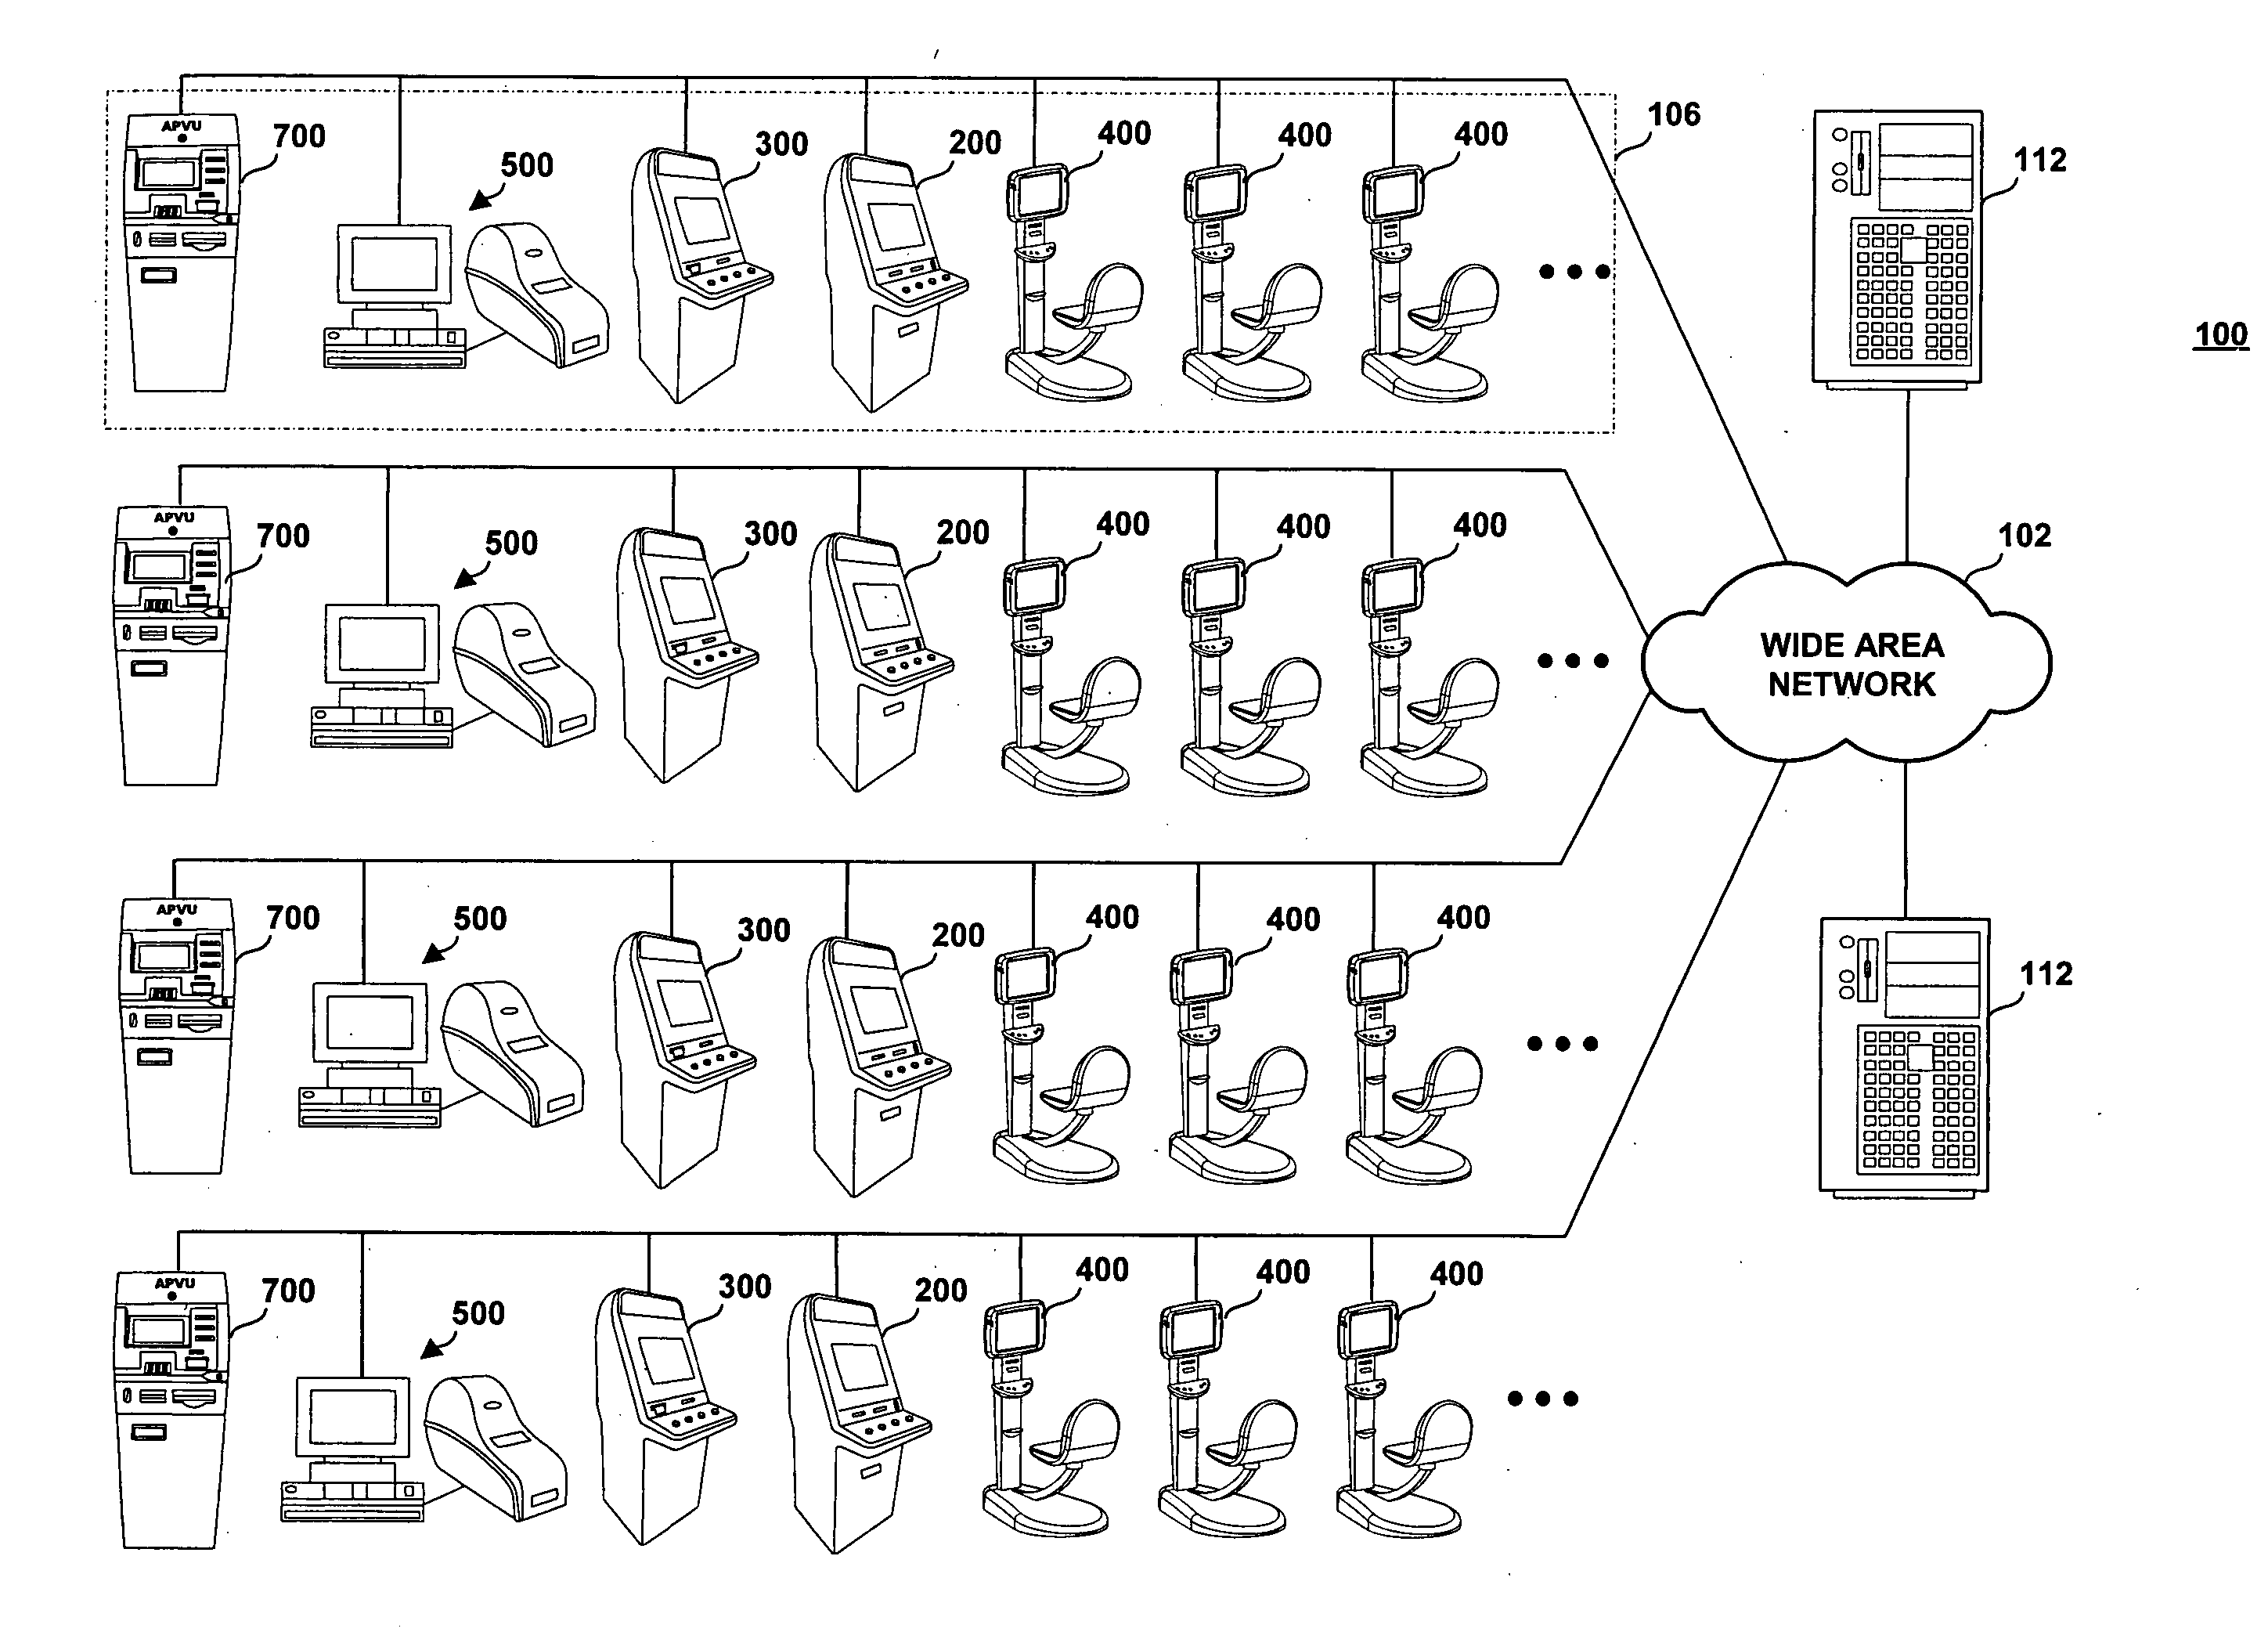 Modular entertainment and gaming system configured to capture raw biometric data and responsive to directives from a remote server